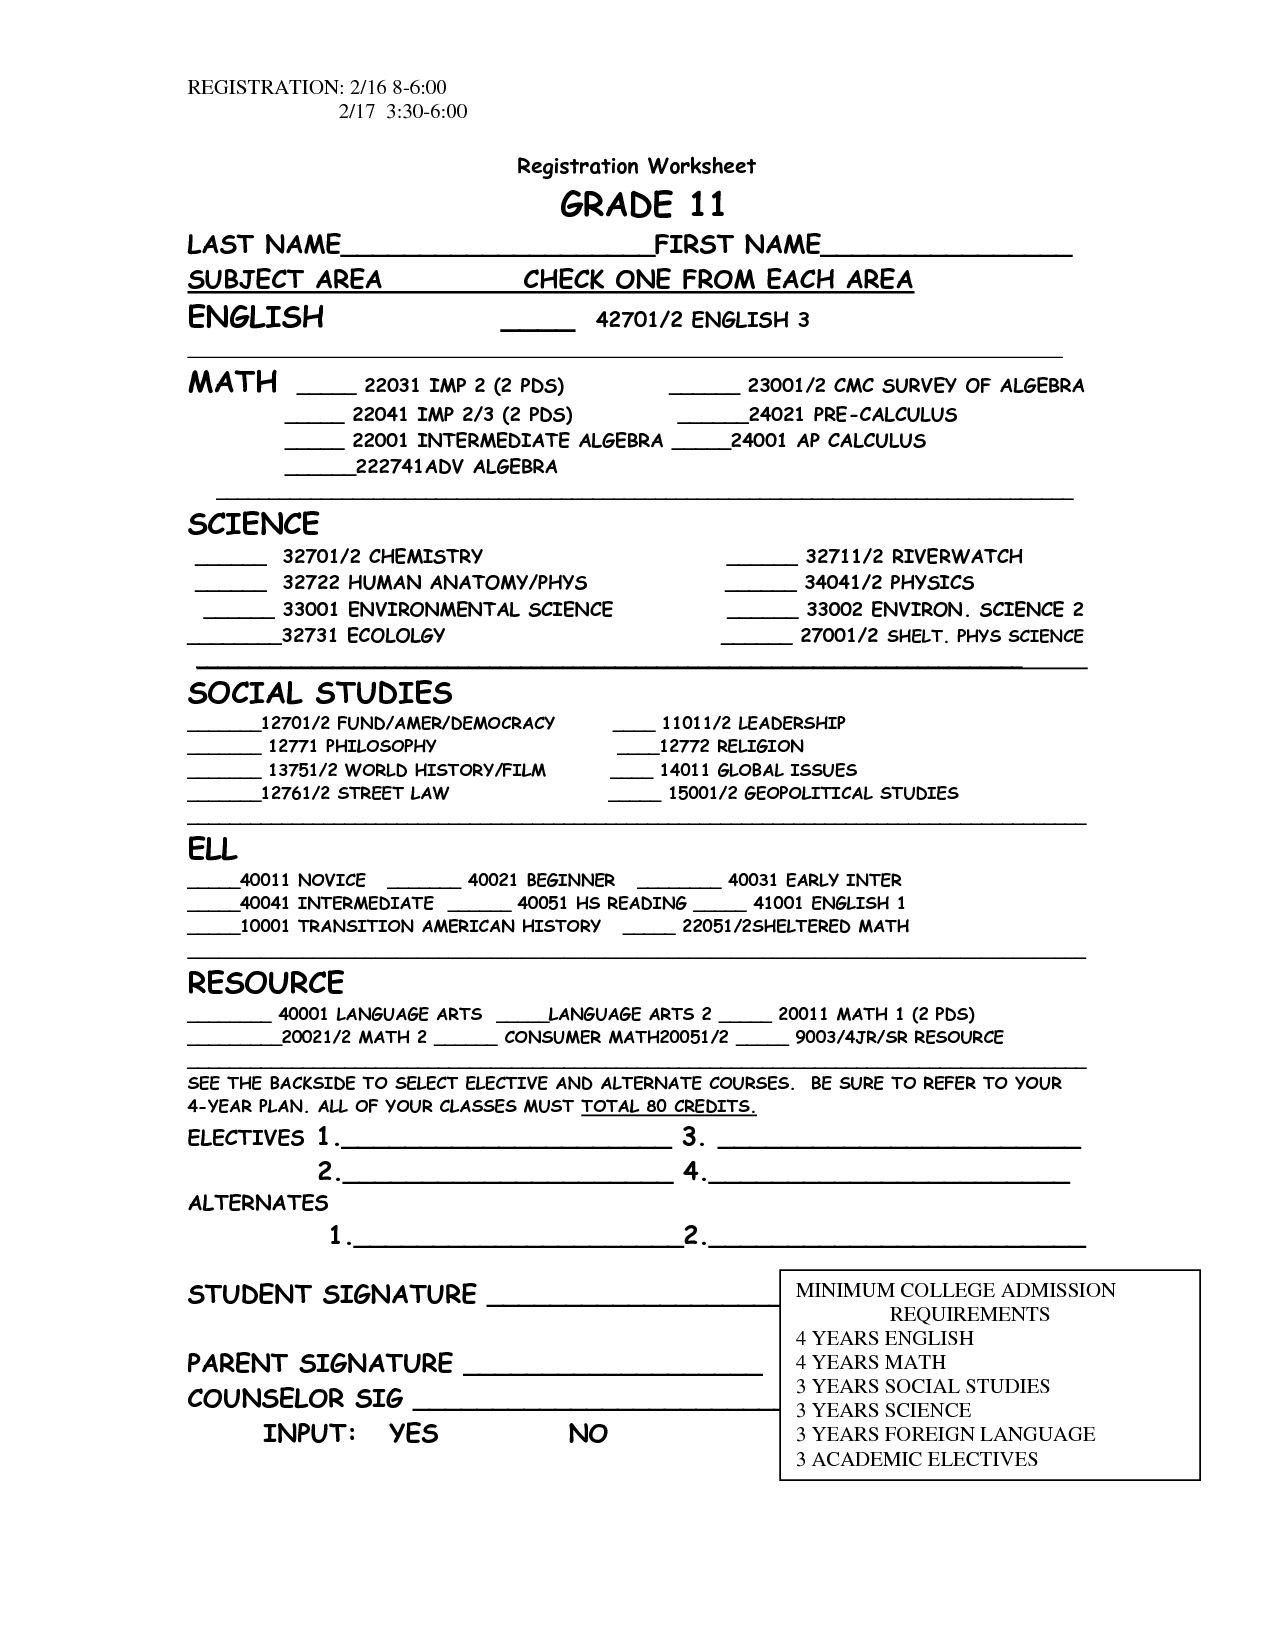 luxury-answer-key-11th-grade-math-worksheets-with-answers-photos